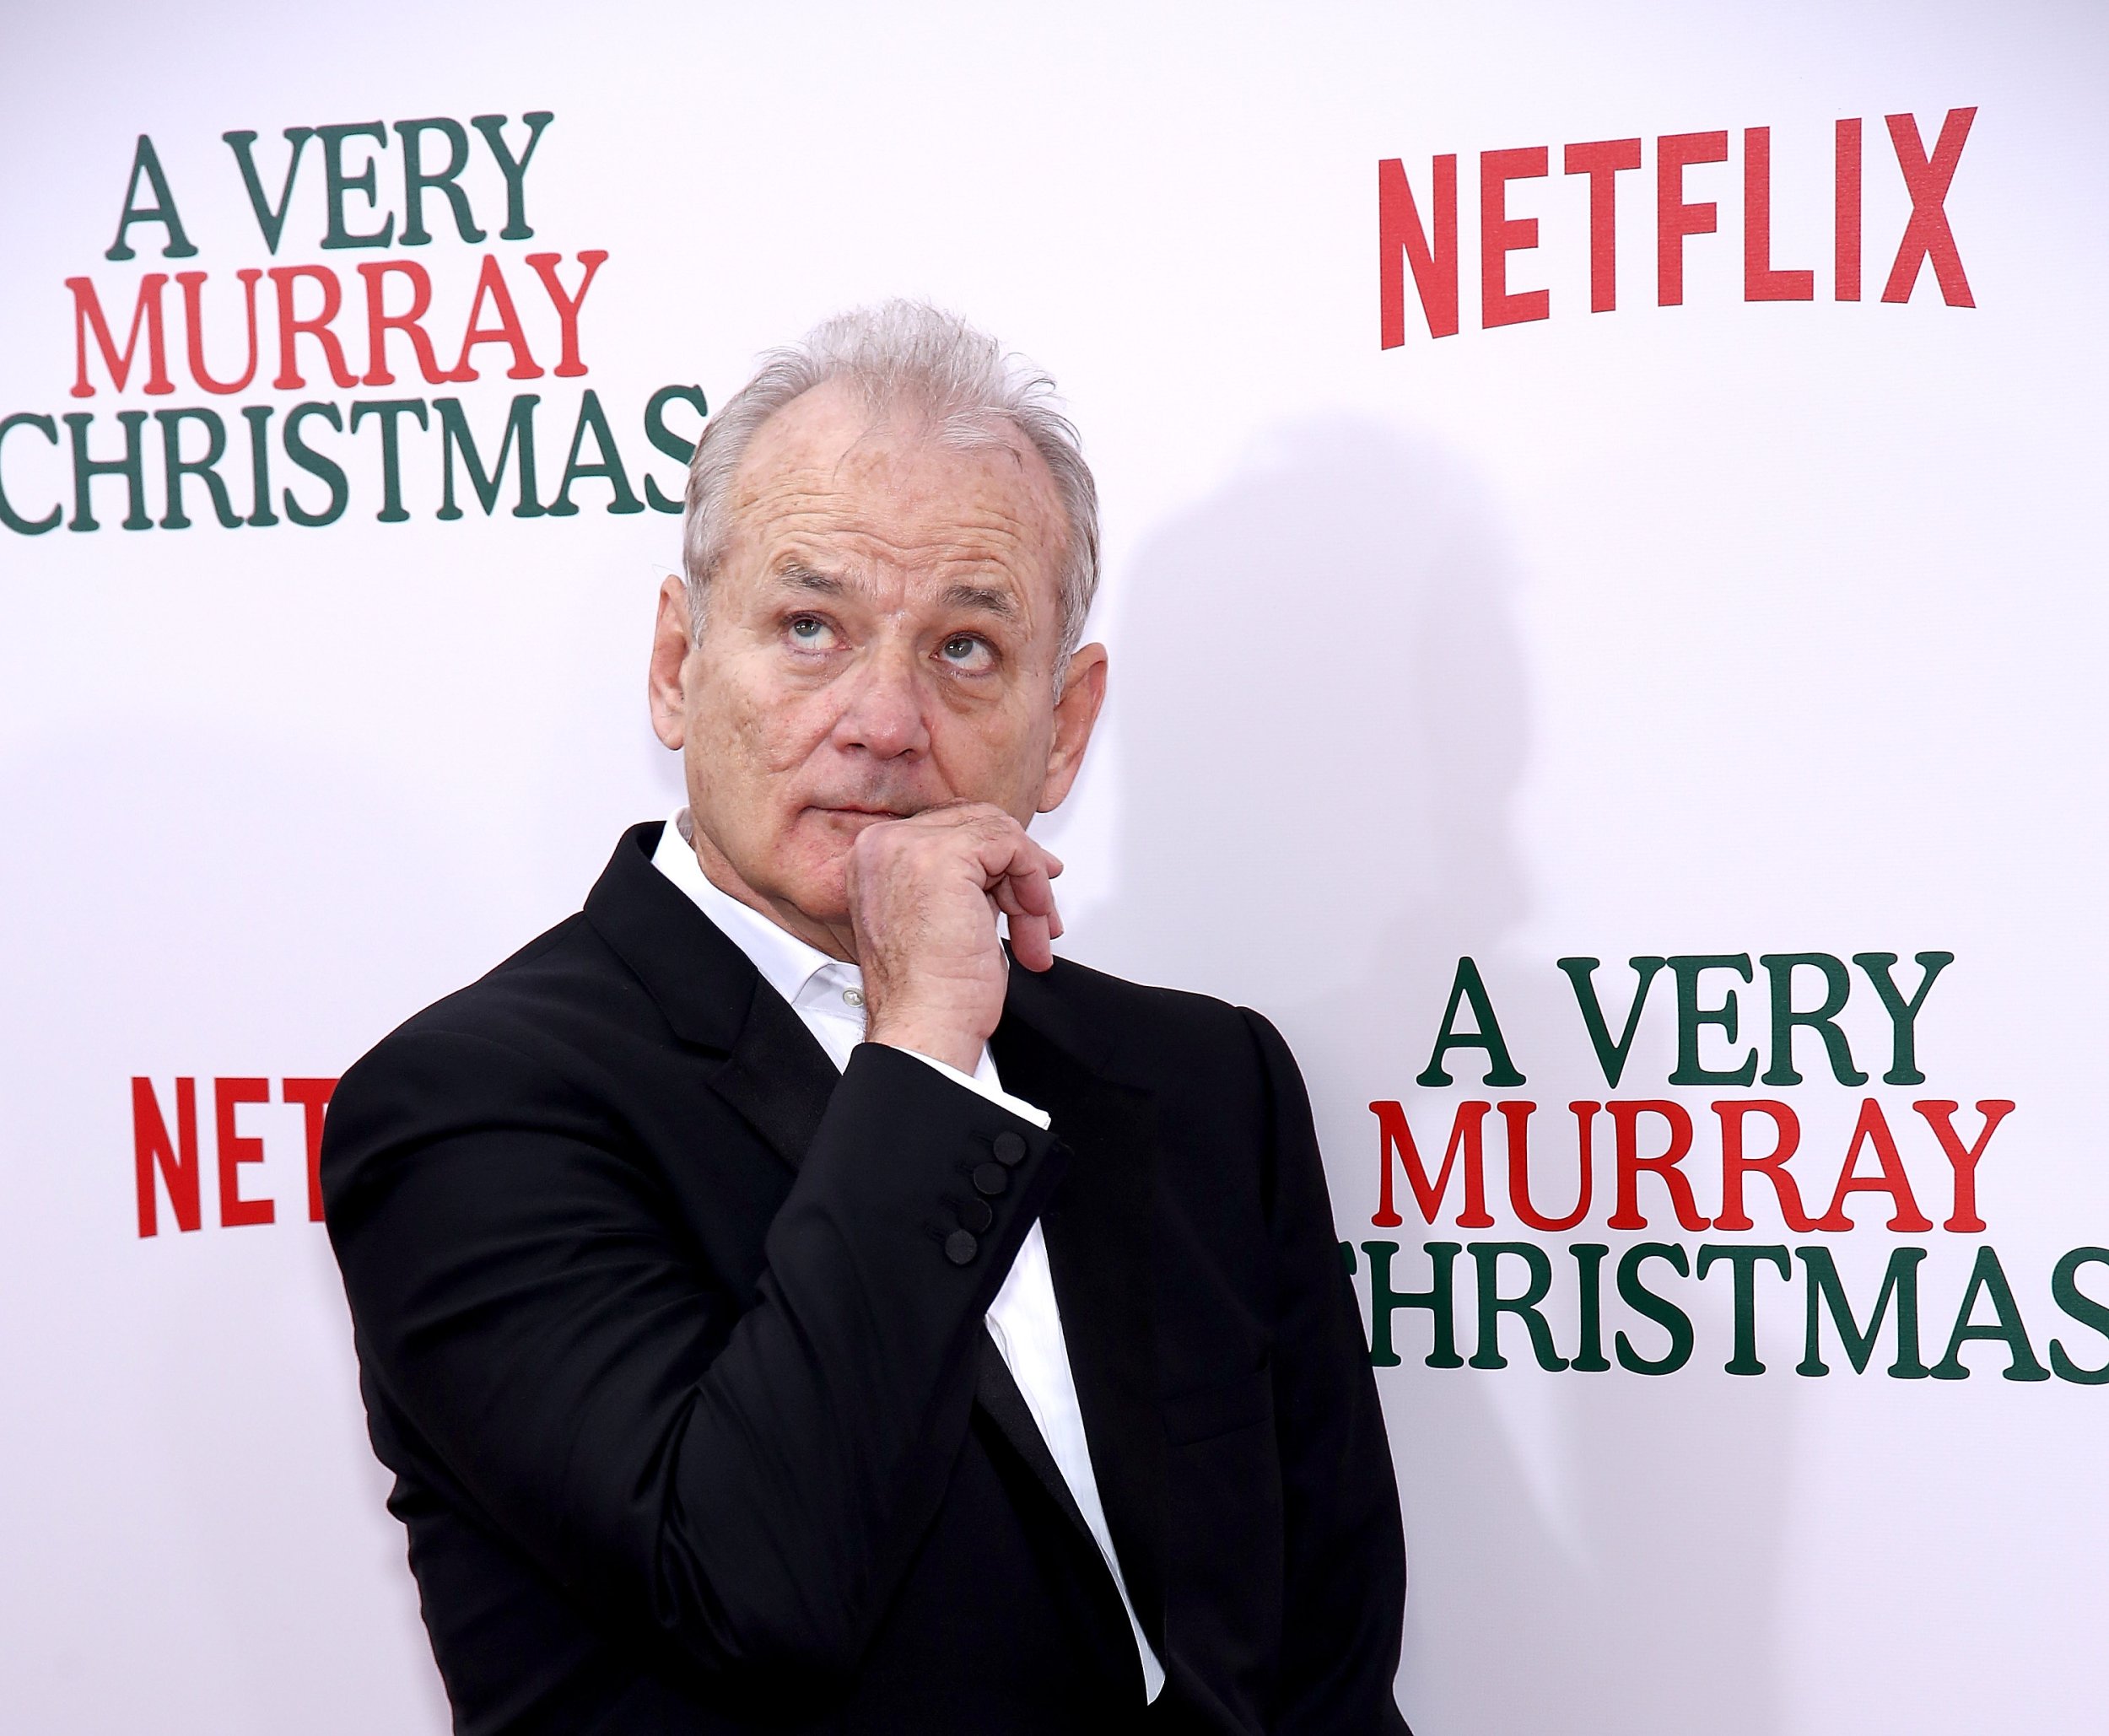 'A Very Murray Christmas' Netflix Special Convinced Bill Murray That